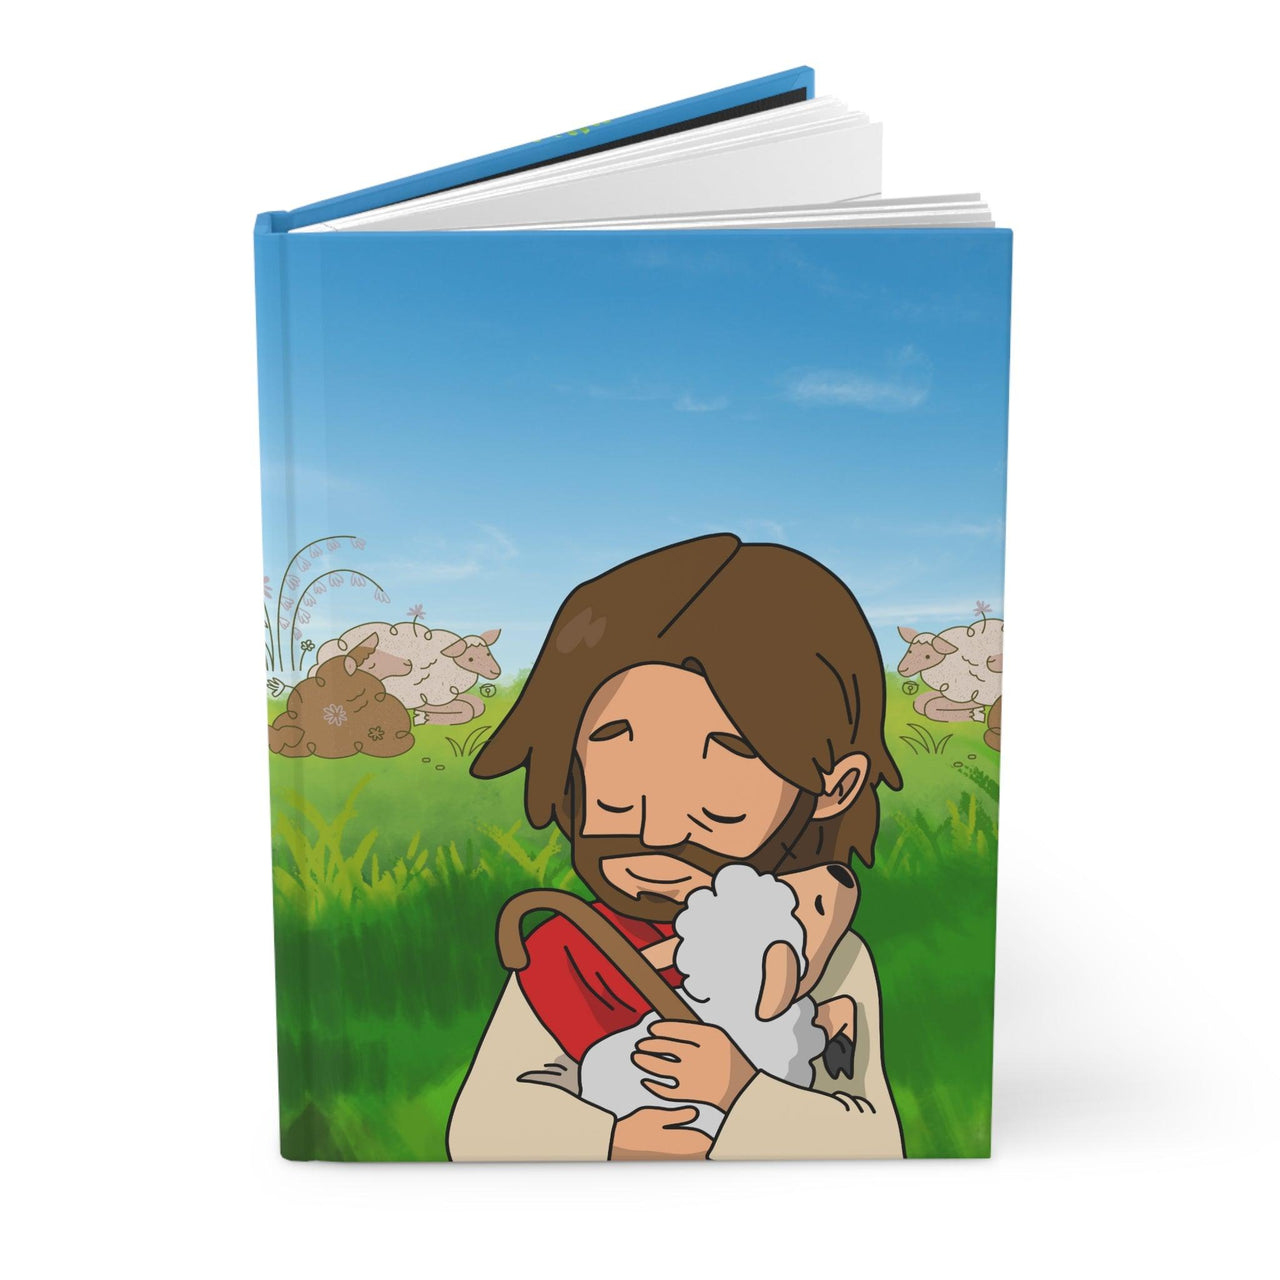 Jesus and the Lamb: He Left the 99 Journal - God's Girl Gifts And Apparel